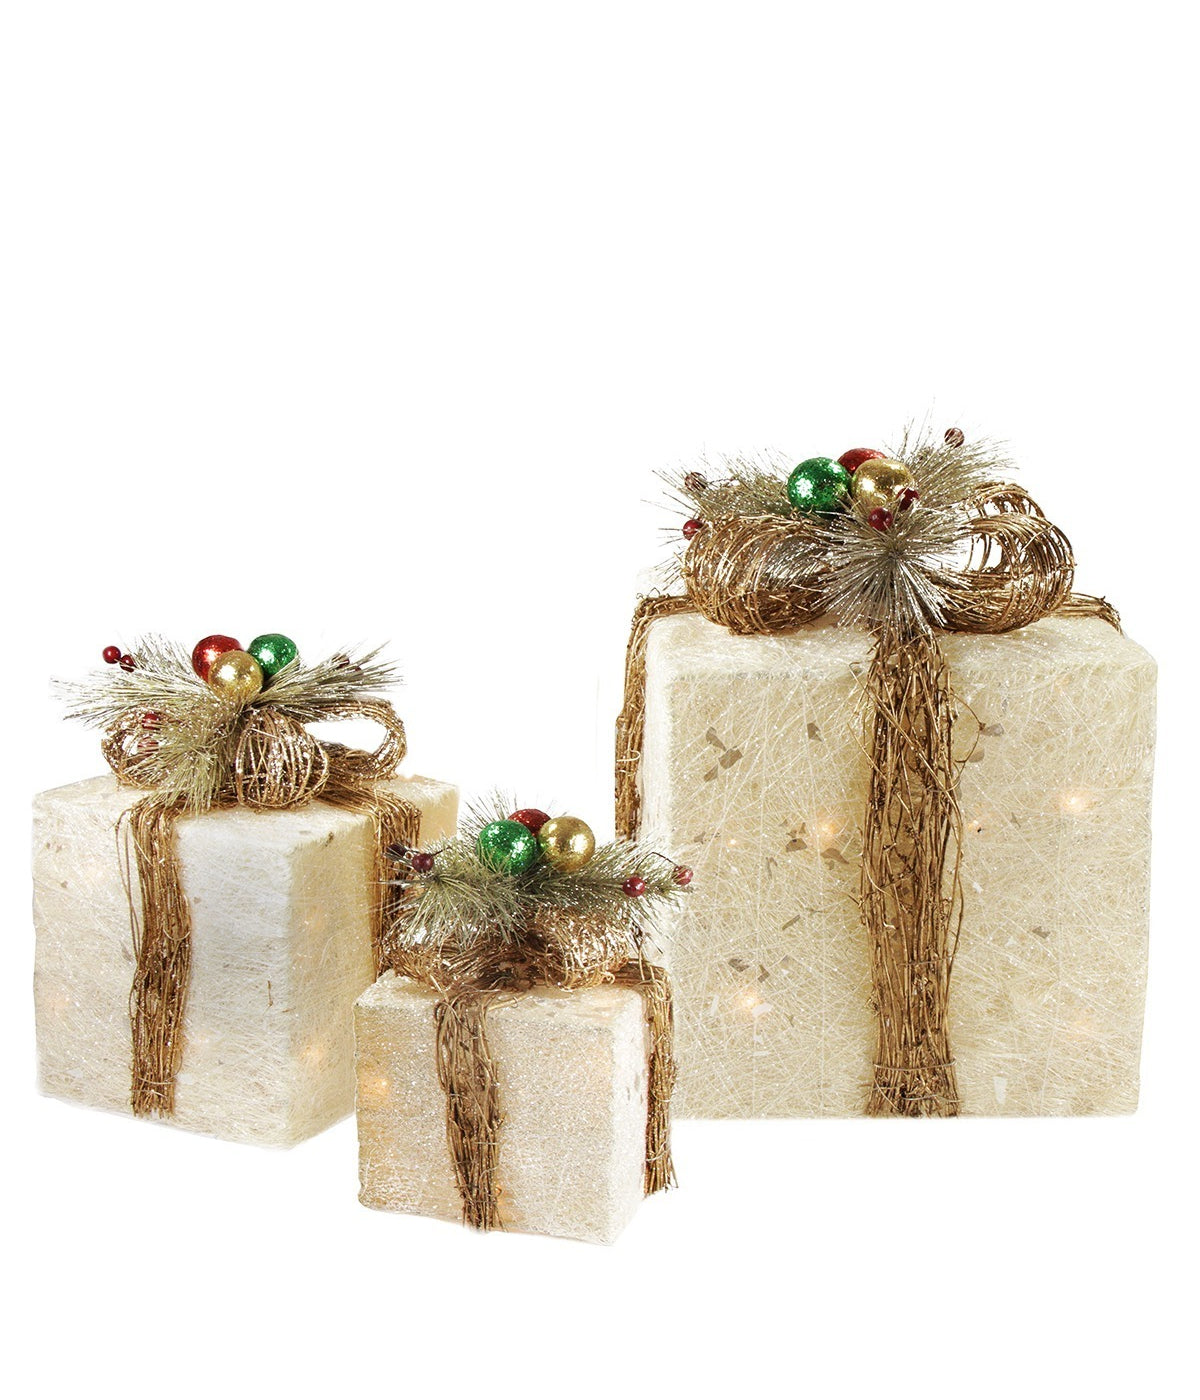 Cream Gift Boxes with Twine Bows Lighted Outdoor Christmas Decorations Set of 3, 10"